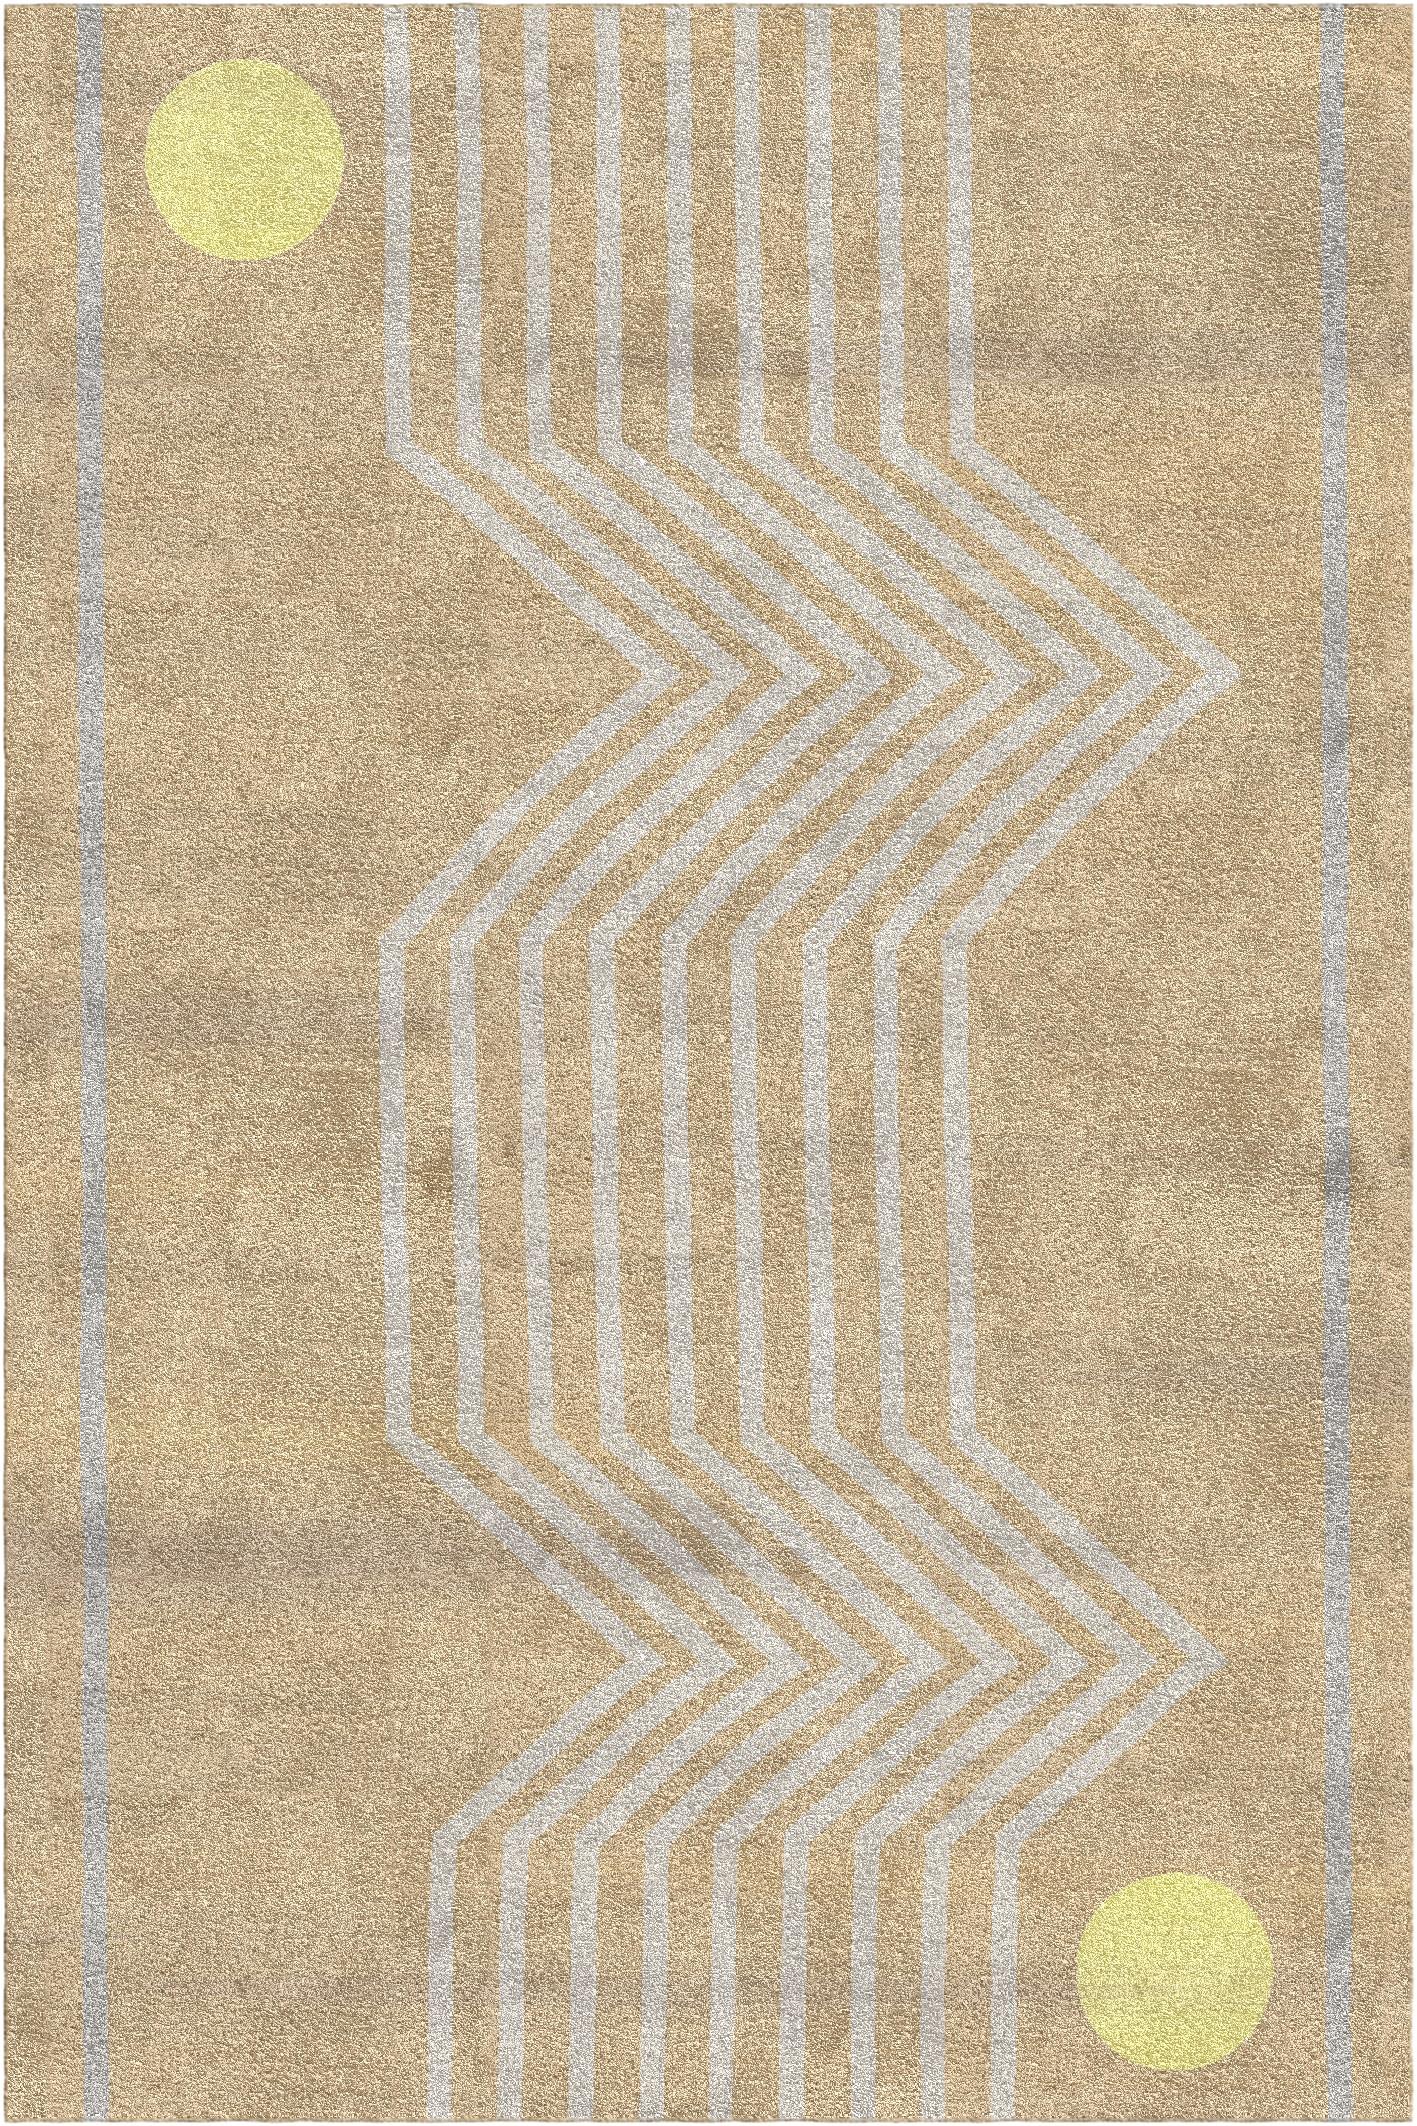 Futuro rug I by Vanessa Ordoñez.
Dimensions: D 300 x W 200 x H 1.5 cm
Materials: Bamboo fibers and linen.

A striking design by Vanessa Ordoñez, this gorgeous rug will add sophistication and allure in any contemporary home. Hand-tufted in Europe